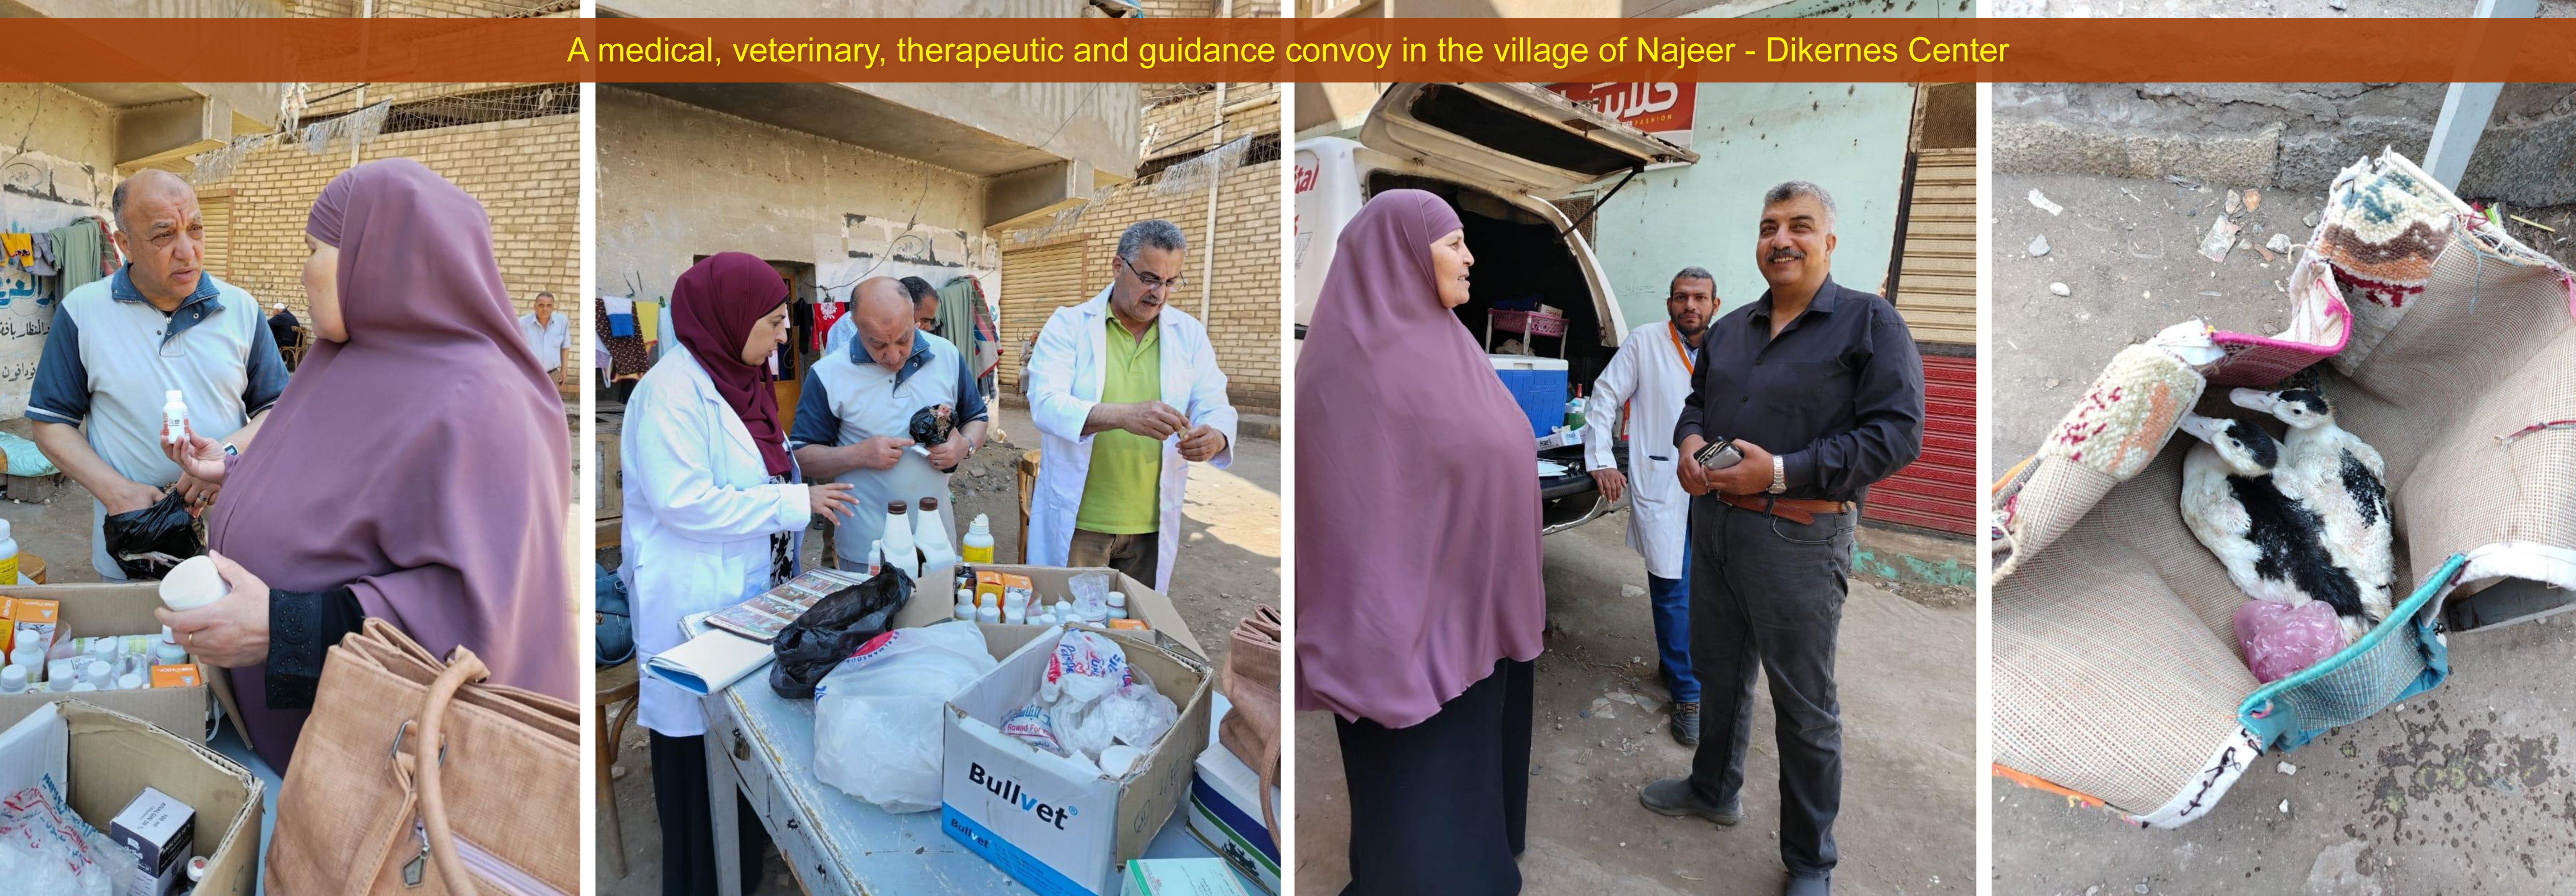 A medical veterinary therapeutic and guidance convoy in the village of Najeer - Dikernes Center, Monday, April 15, 2024